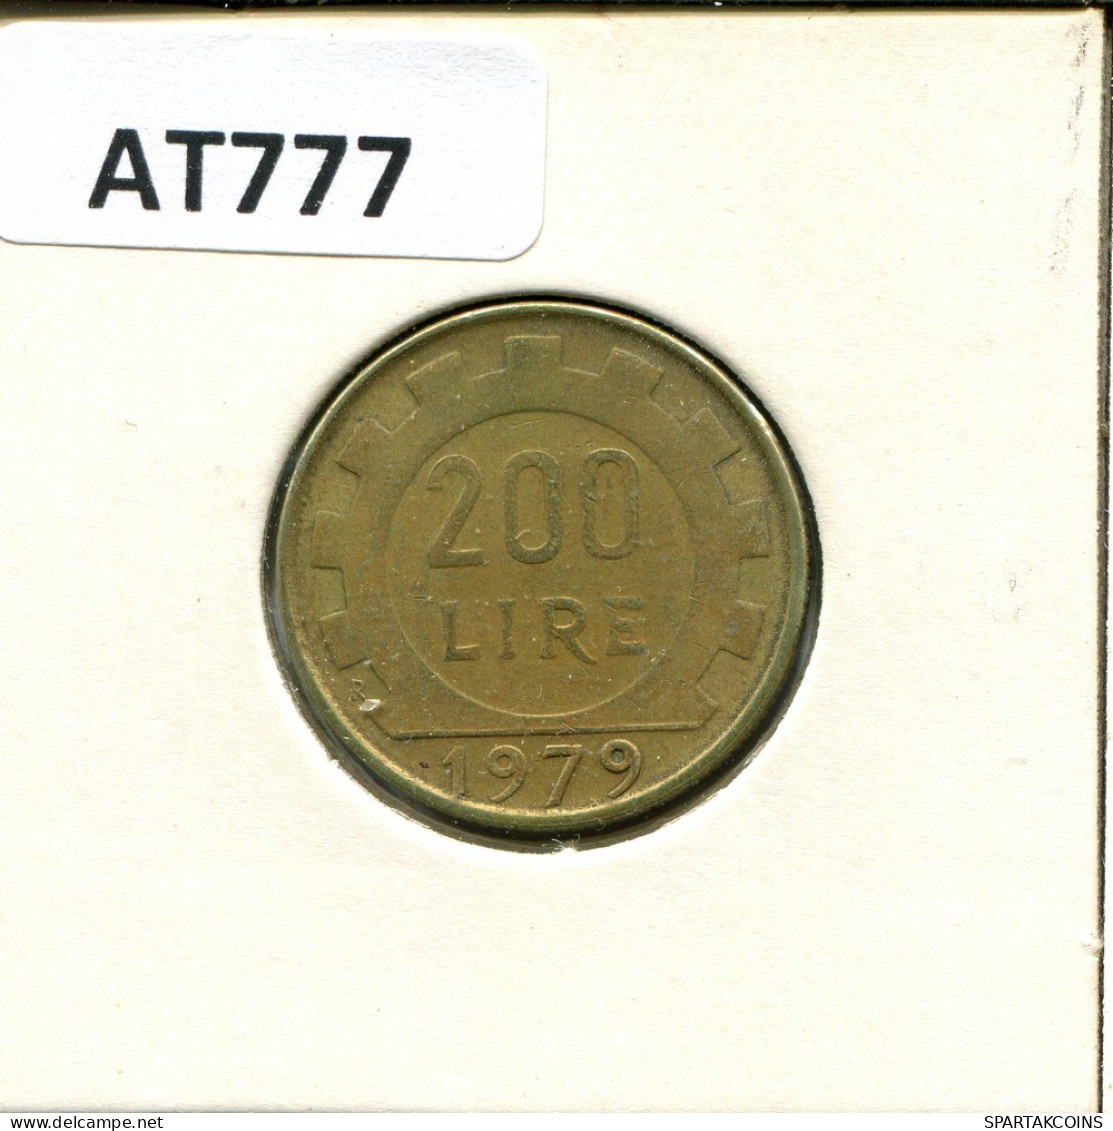 200 LIRE 1979 ITALY Coin #AT777.U.A - 200 Lire